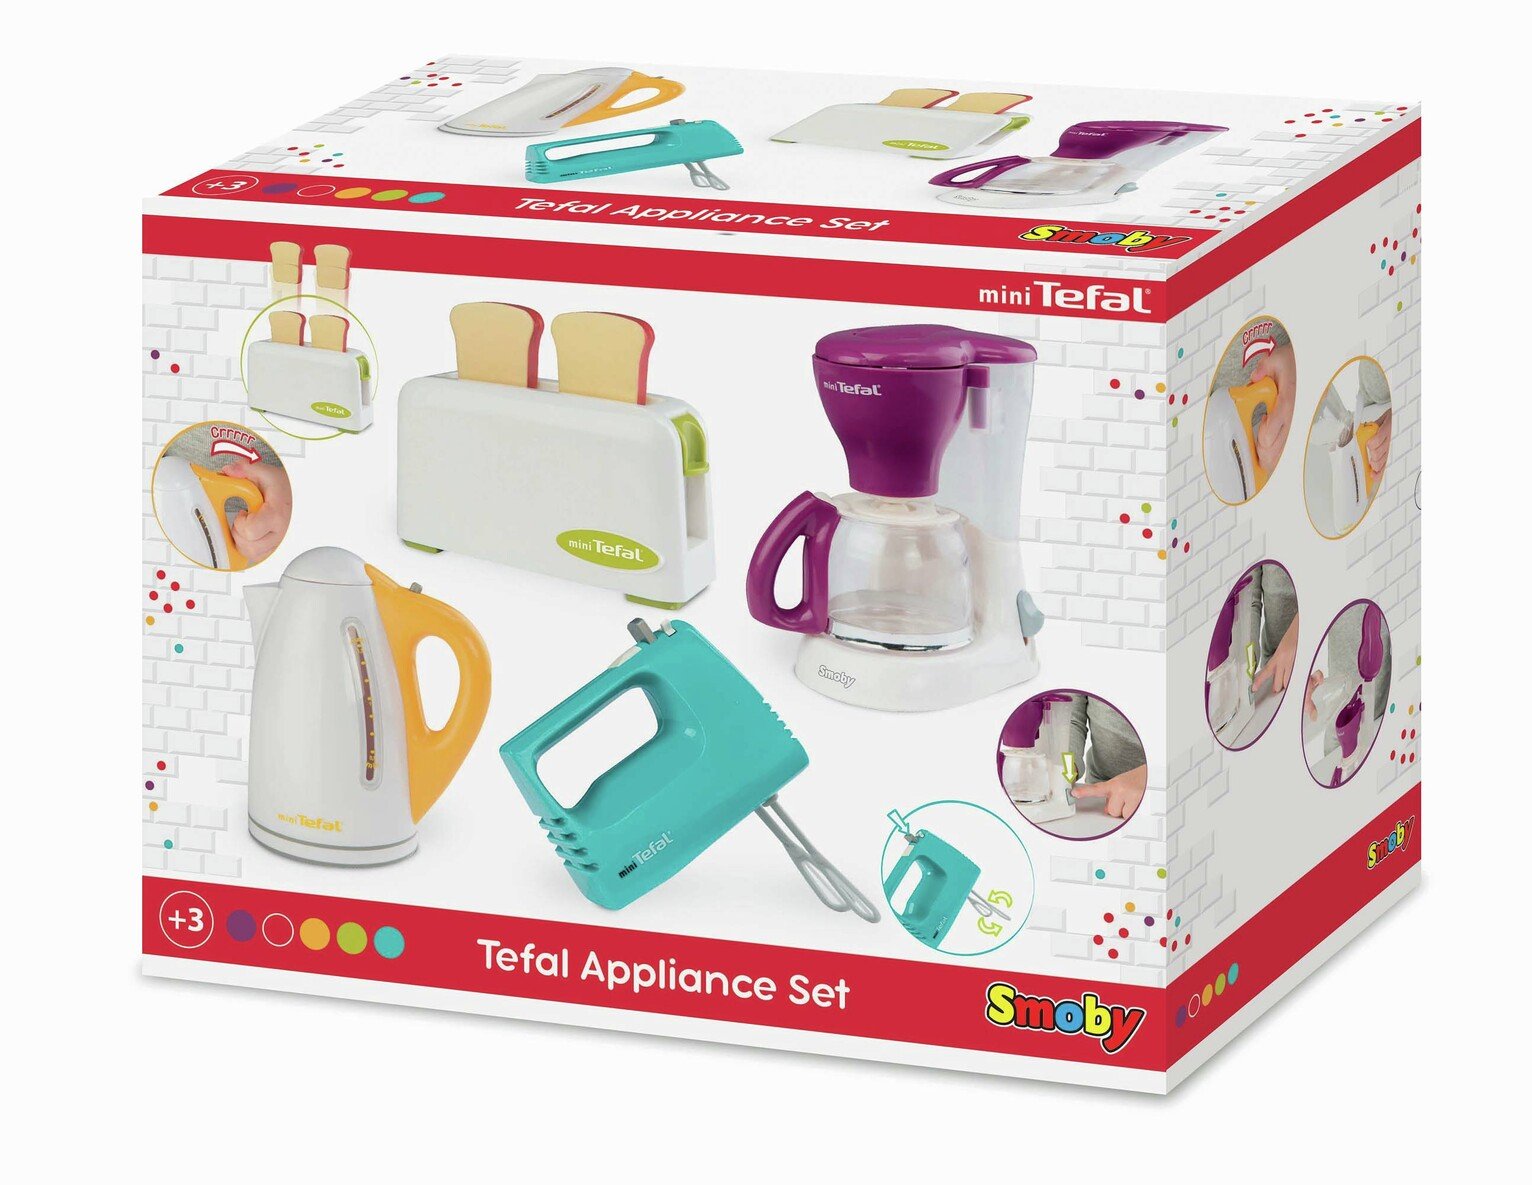 Tefal Toy Appliance Set Review